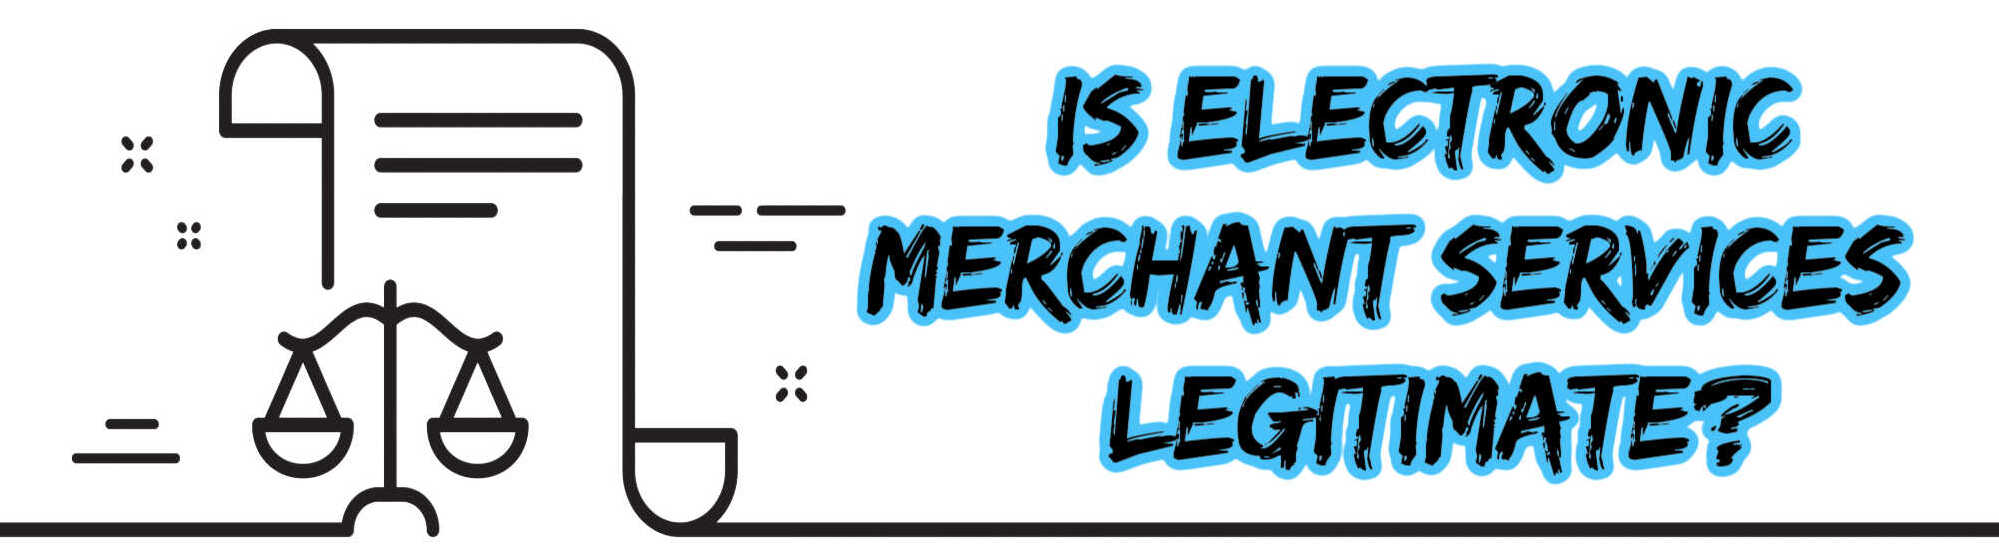 image of is electronic merchant services legitimate